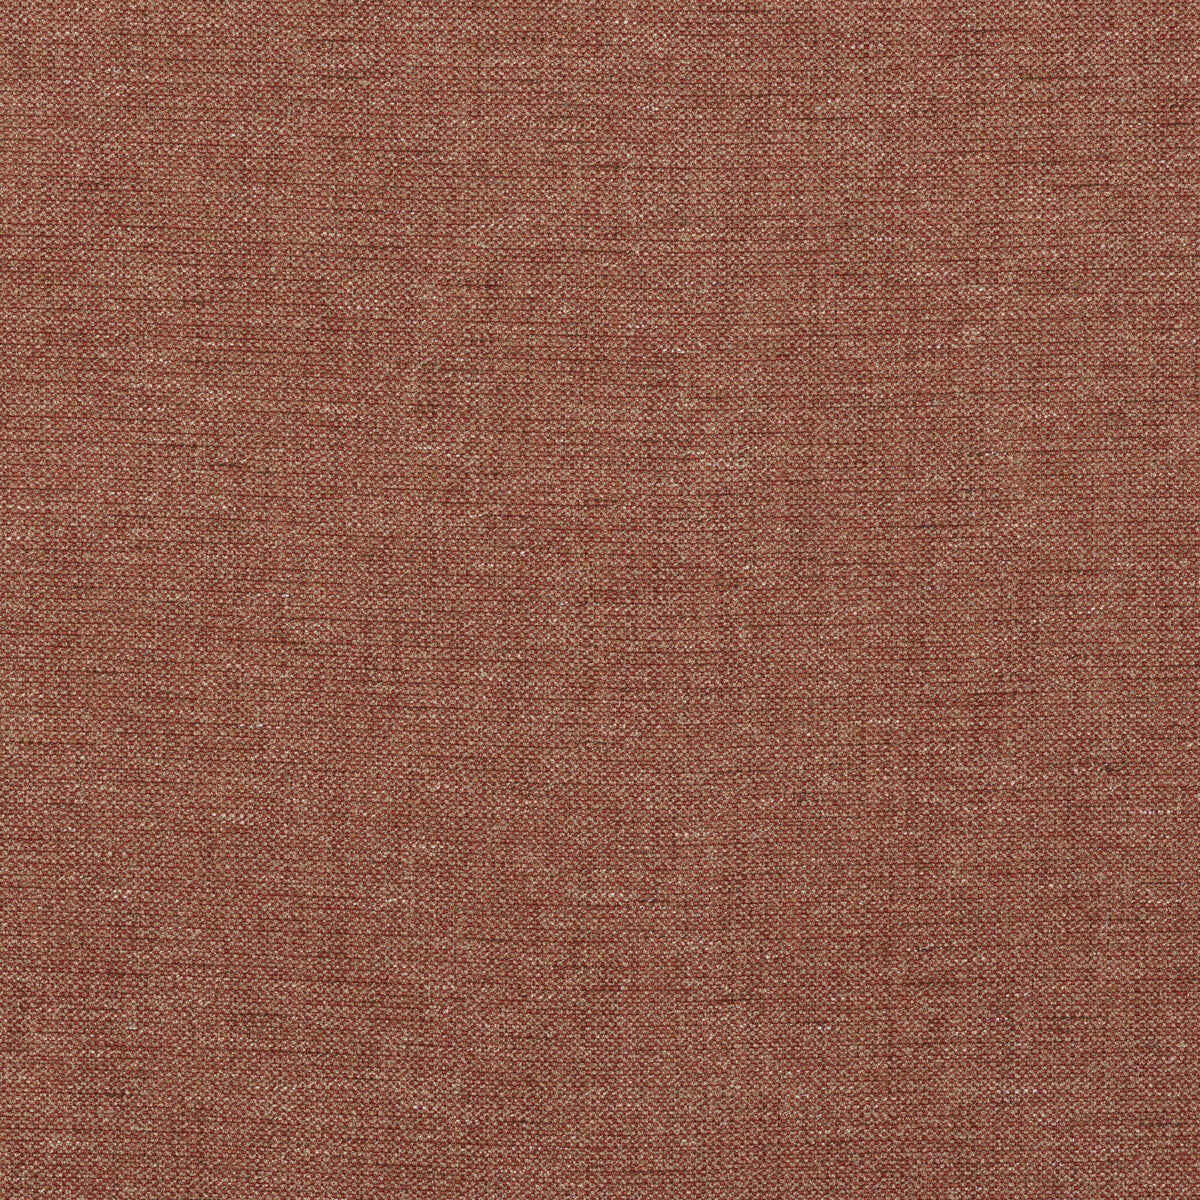 Pentridge fabric in tomato color - pattern BF10956.450.0 - by G P &amp; J Baker in the Baker House Textures collection